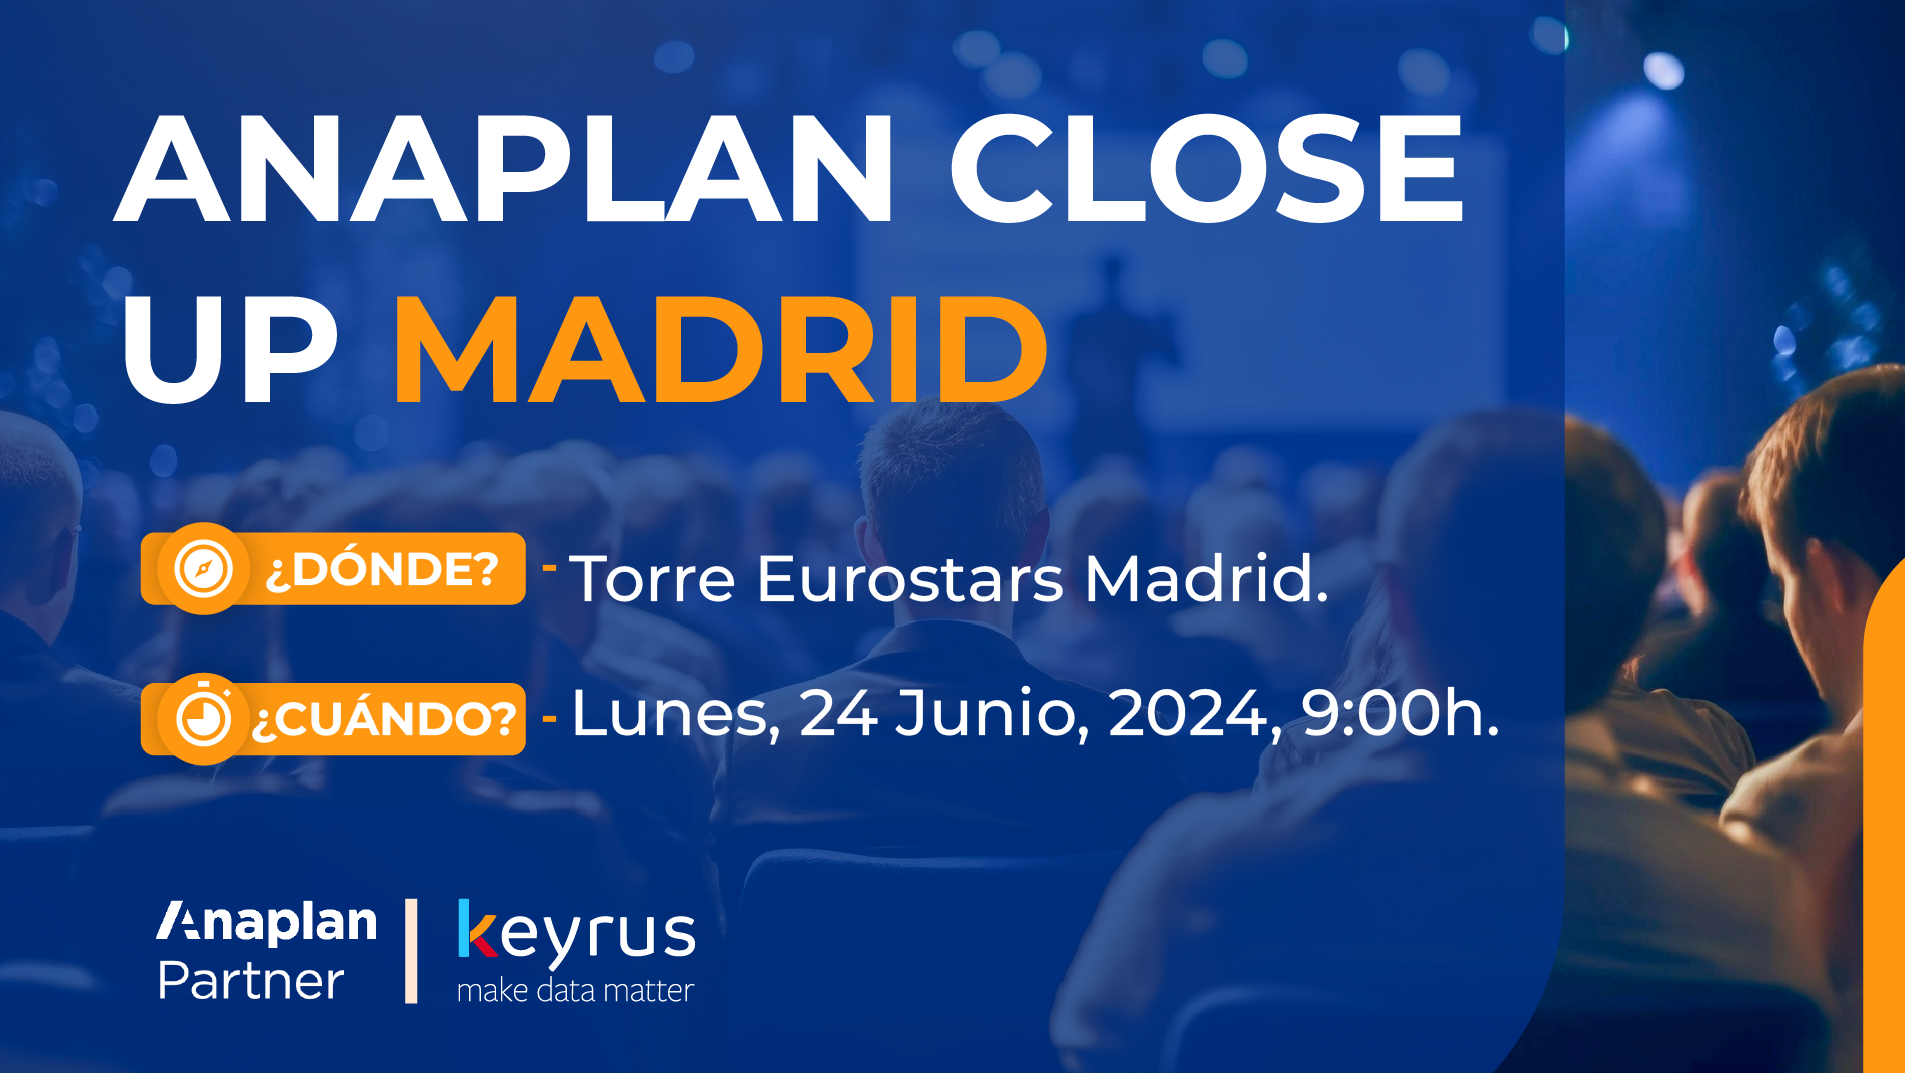 Anaplan close up Madrid 2024 featured image-04